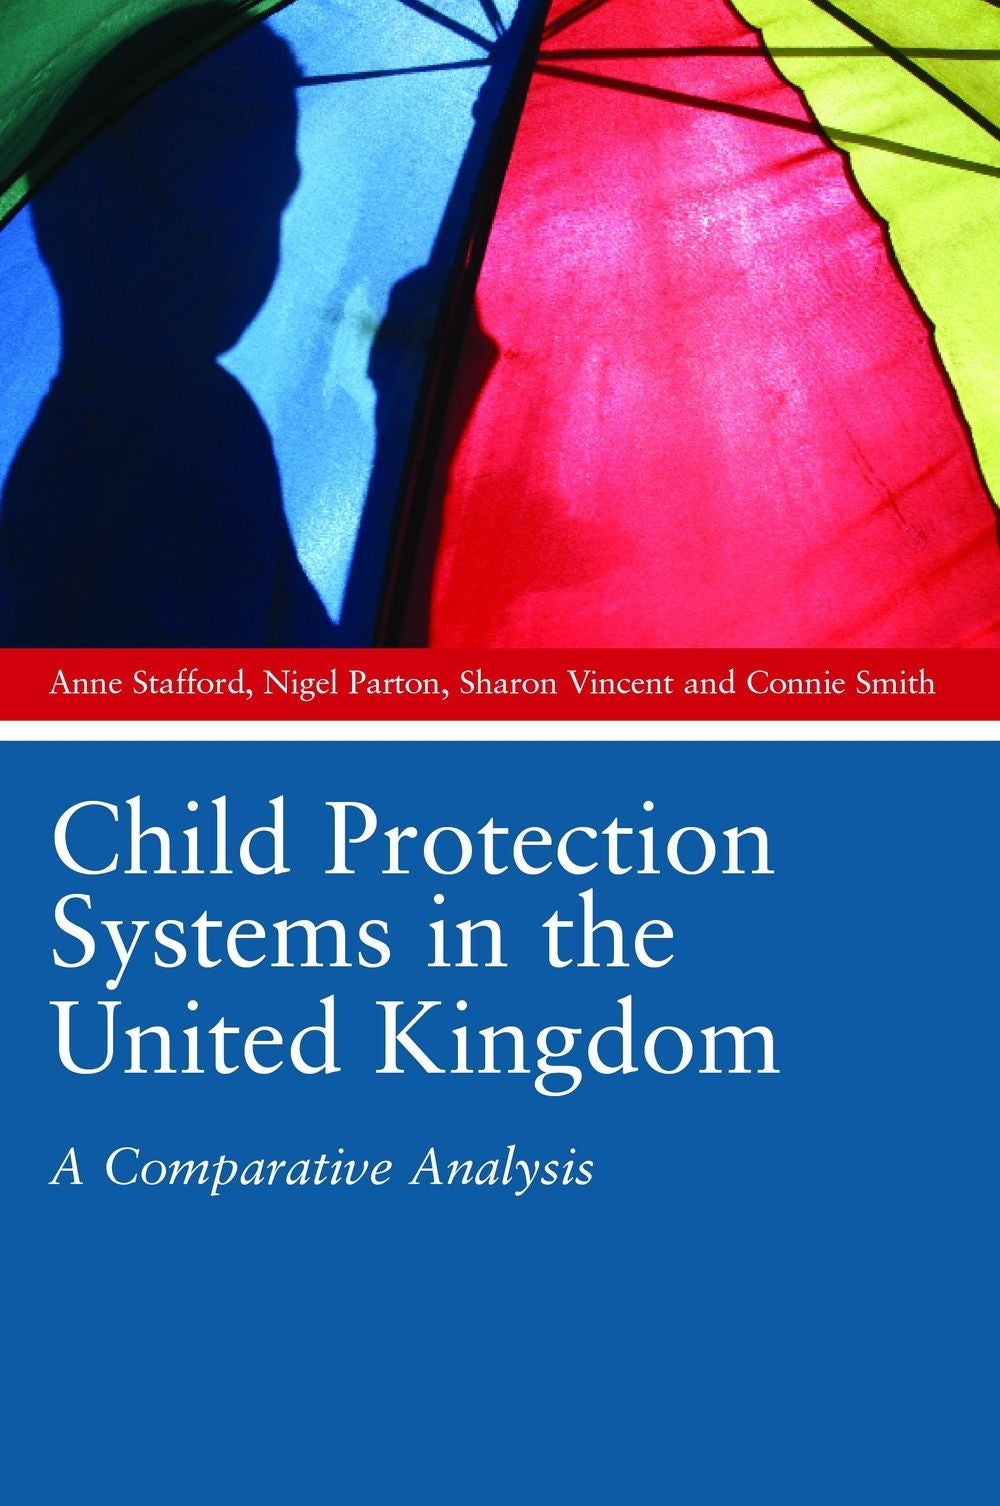 Child Protection Systems in the United Kingdom by Anne Stafford, Sharon Vincent, Connie Smith, Nigel Parton